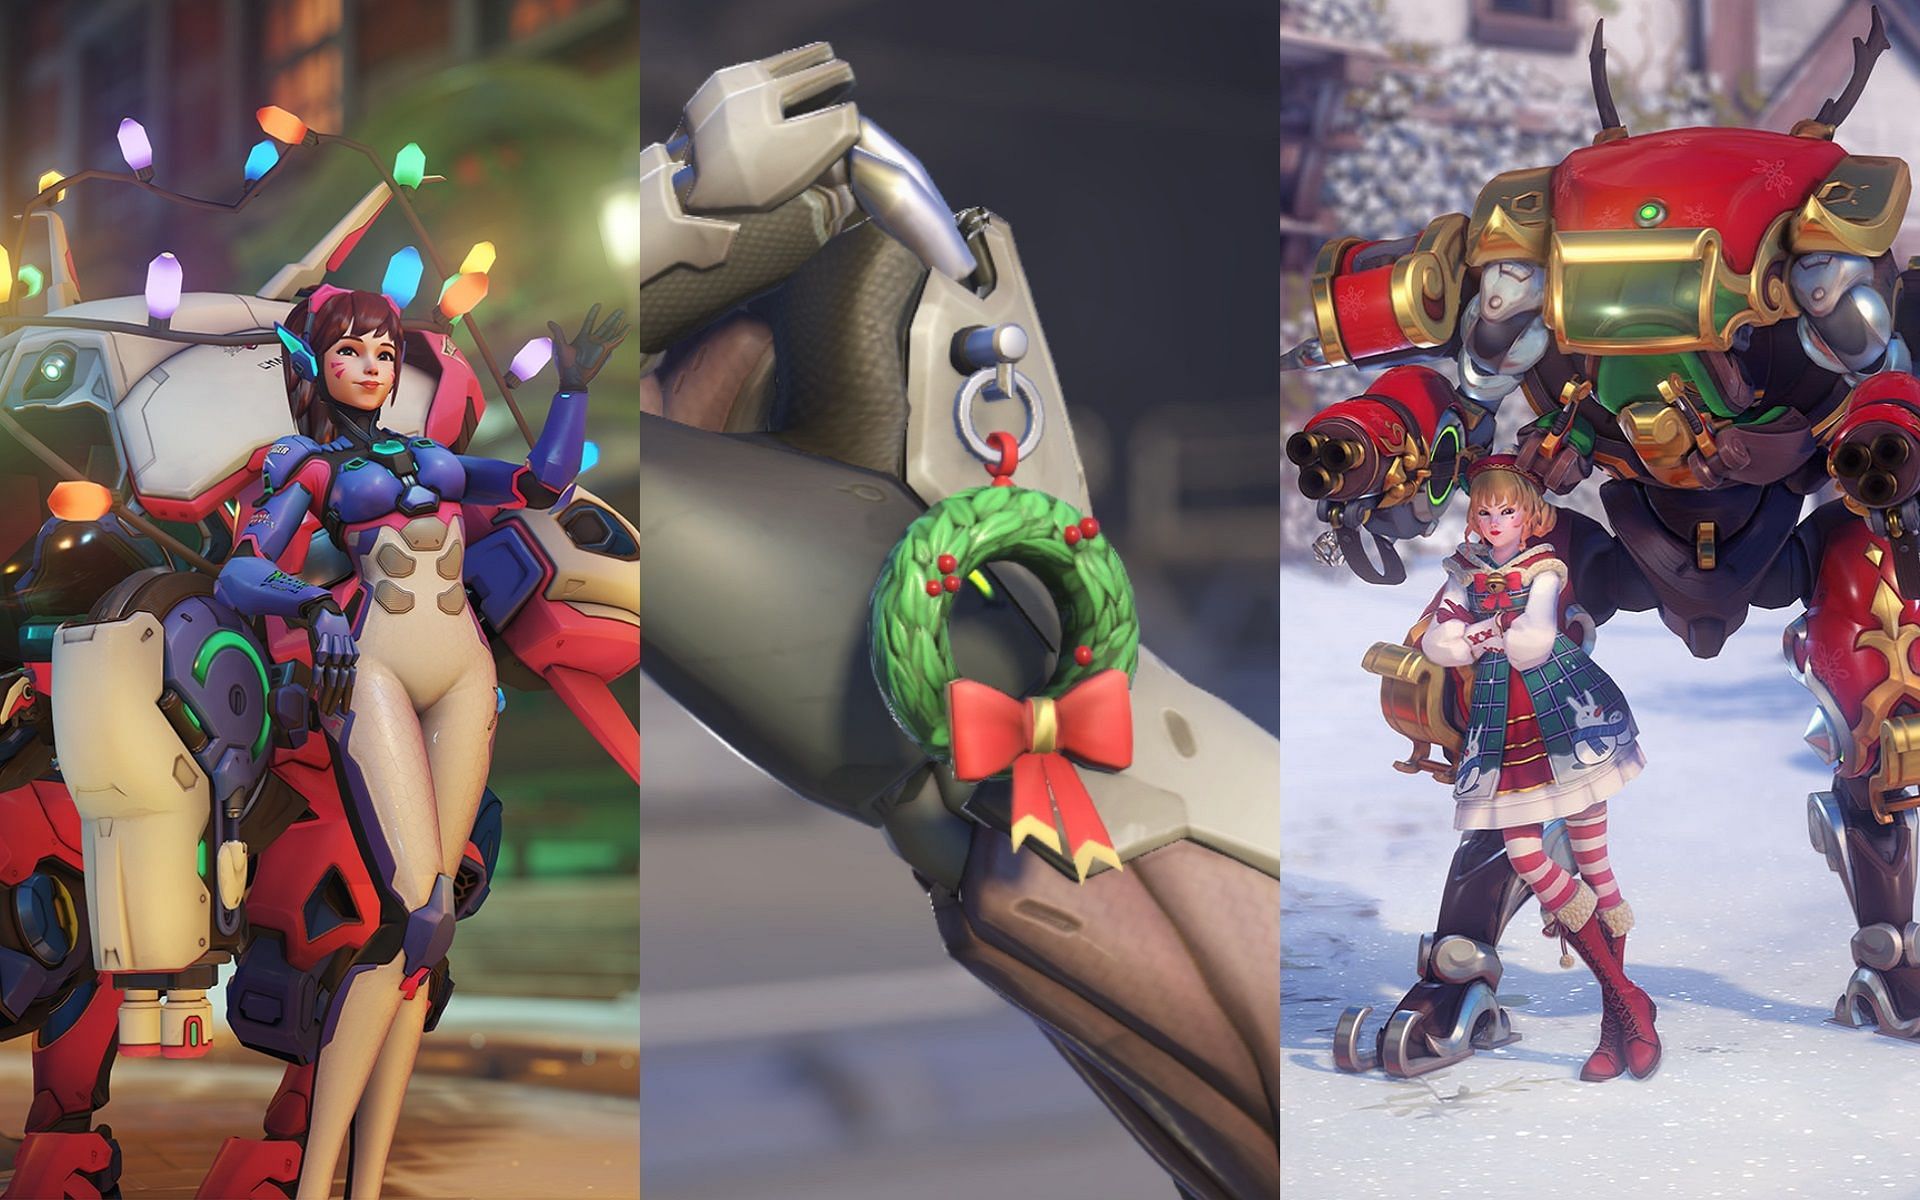 Overwatch 2 Twitch Drops and Log in rewards for Winter Wonderland revealed (Images via Blizzard Entertainment)